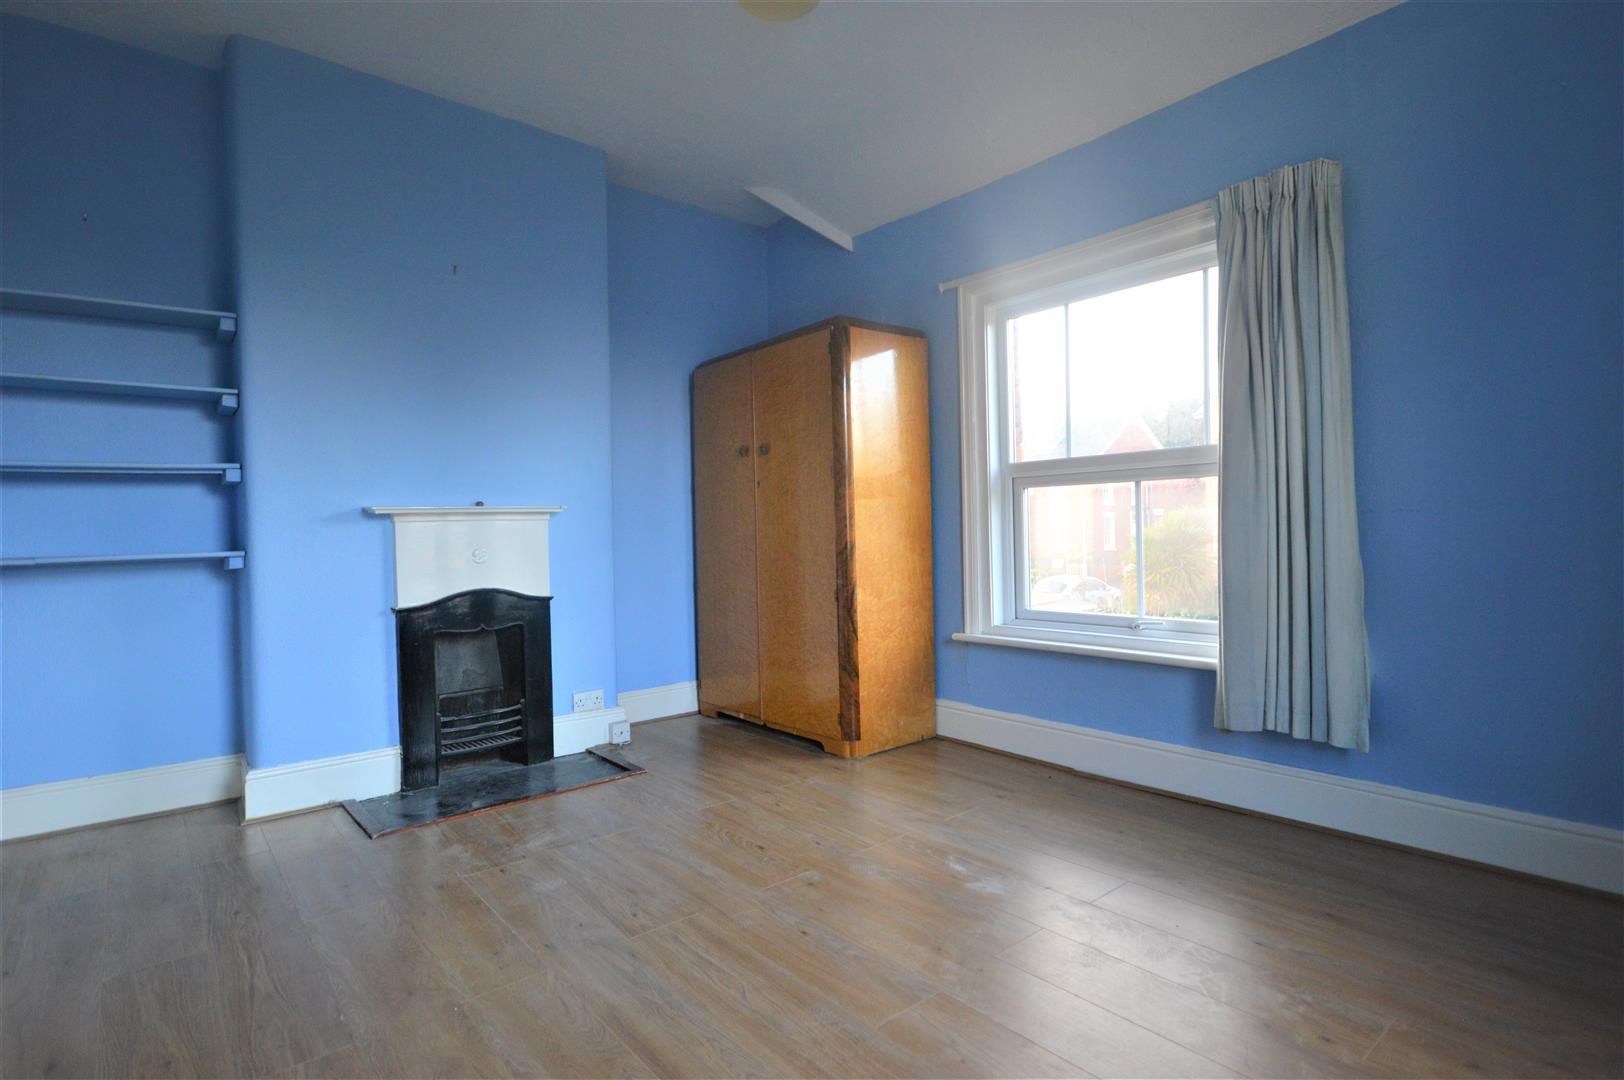 3 bed end of terrace for sale in Leominster 6